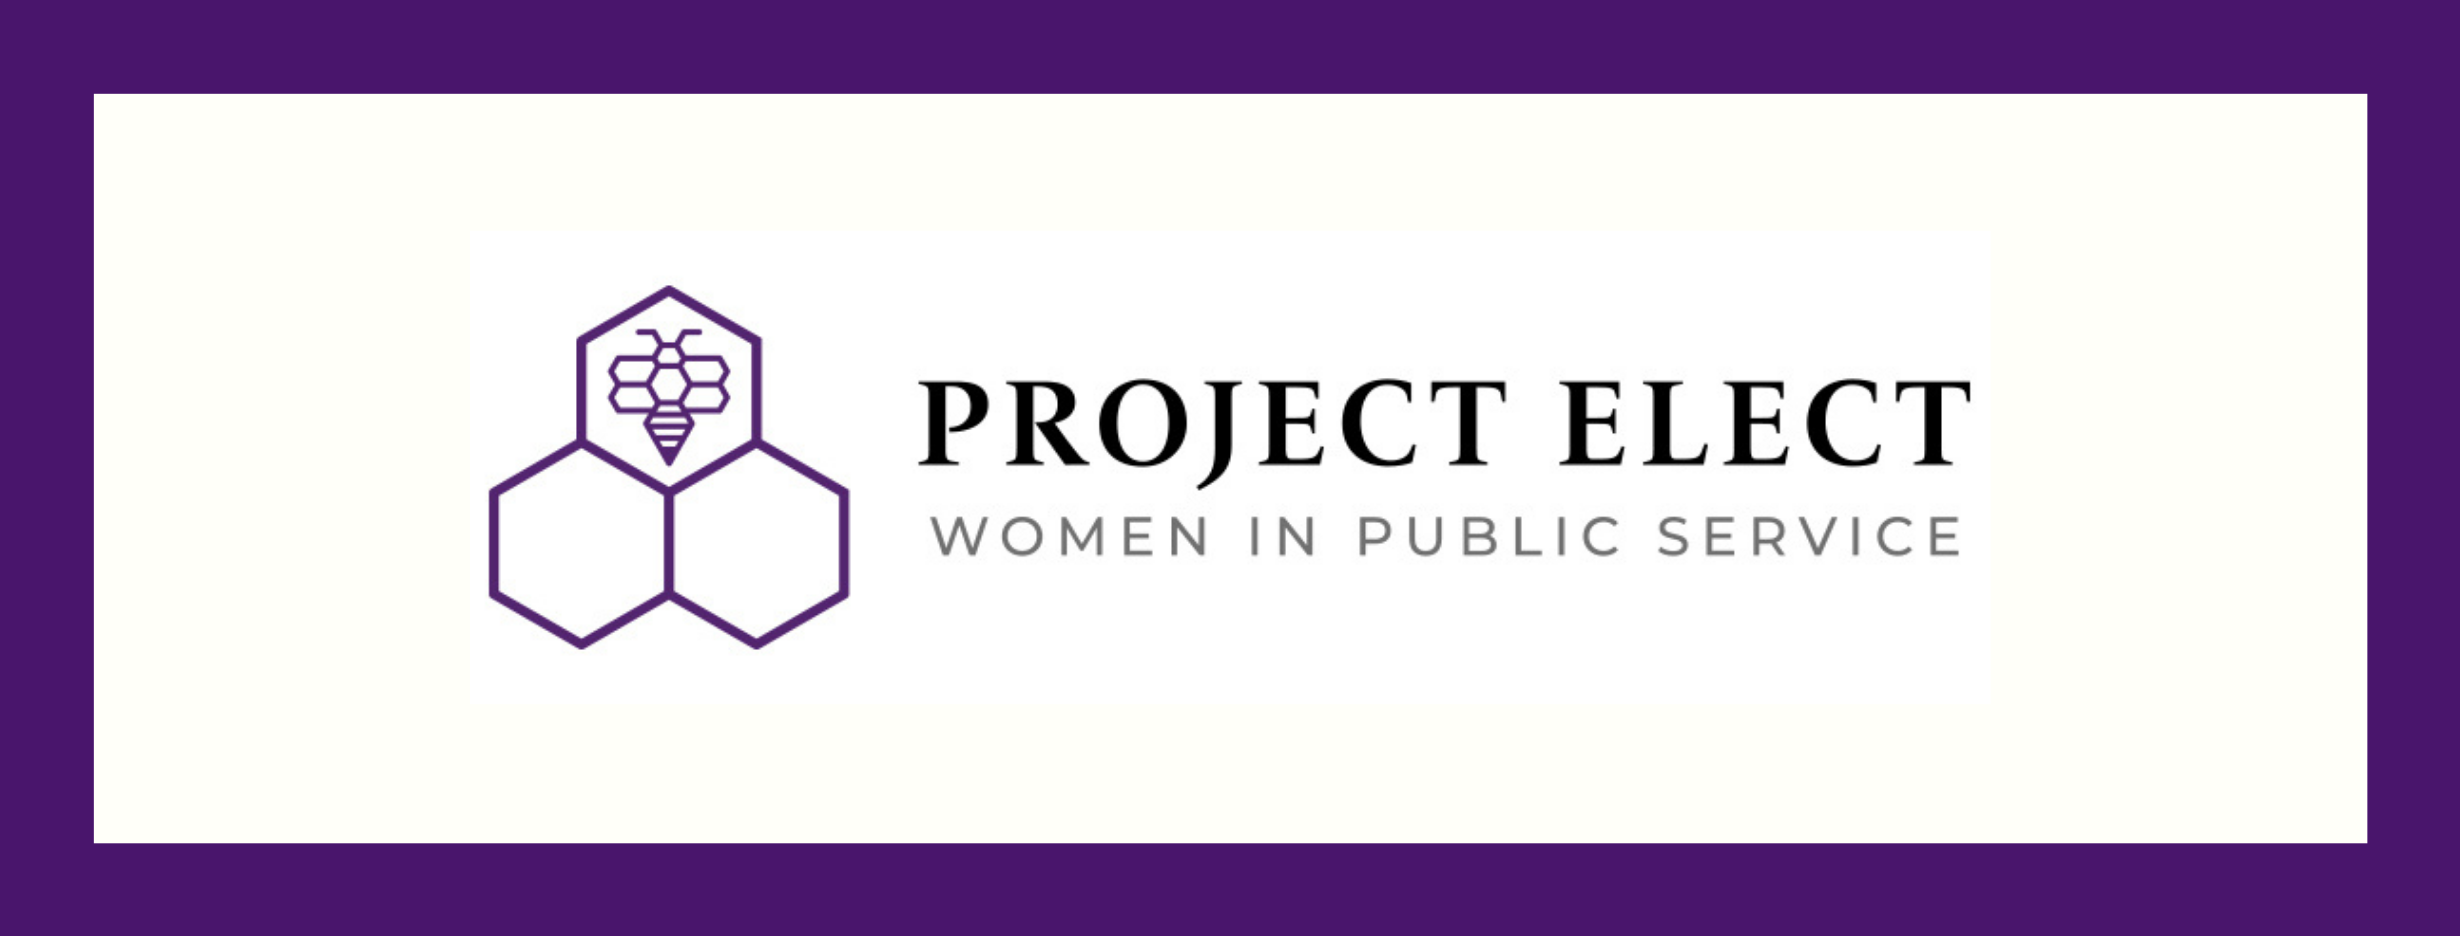 Project Elect